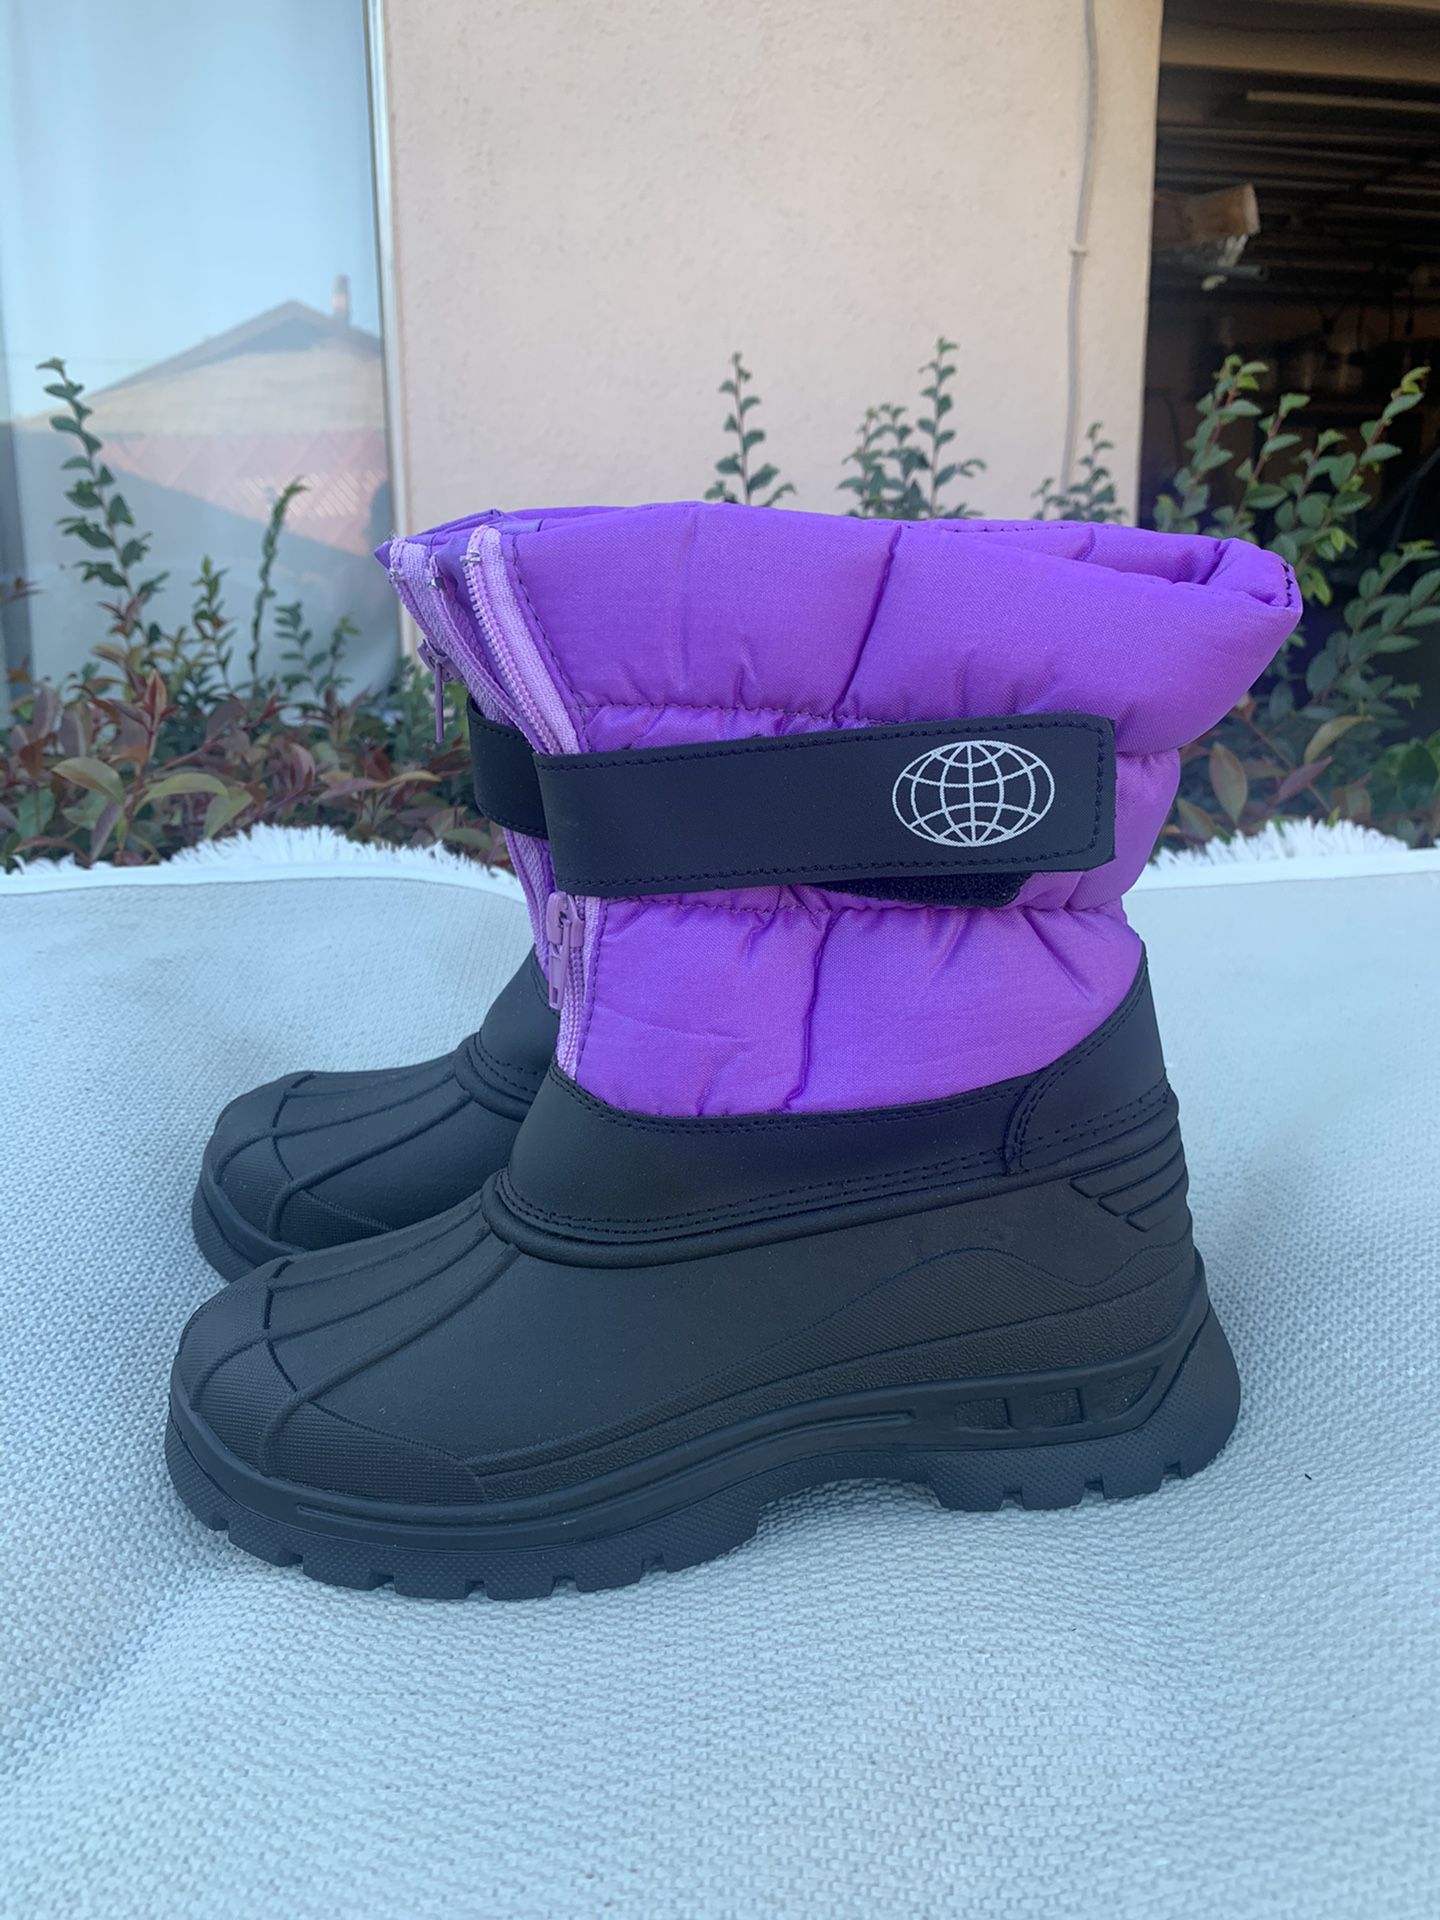 Snow boots for girls size 4 kids sizes